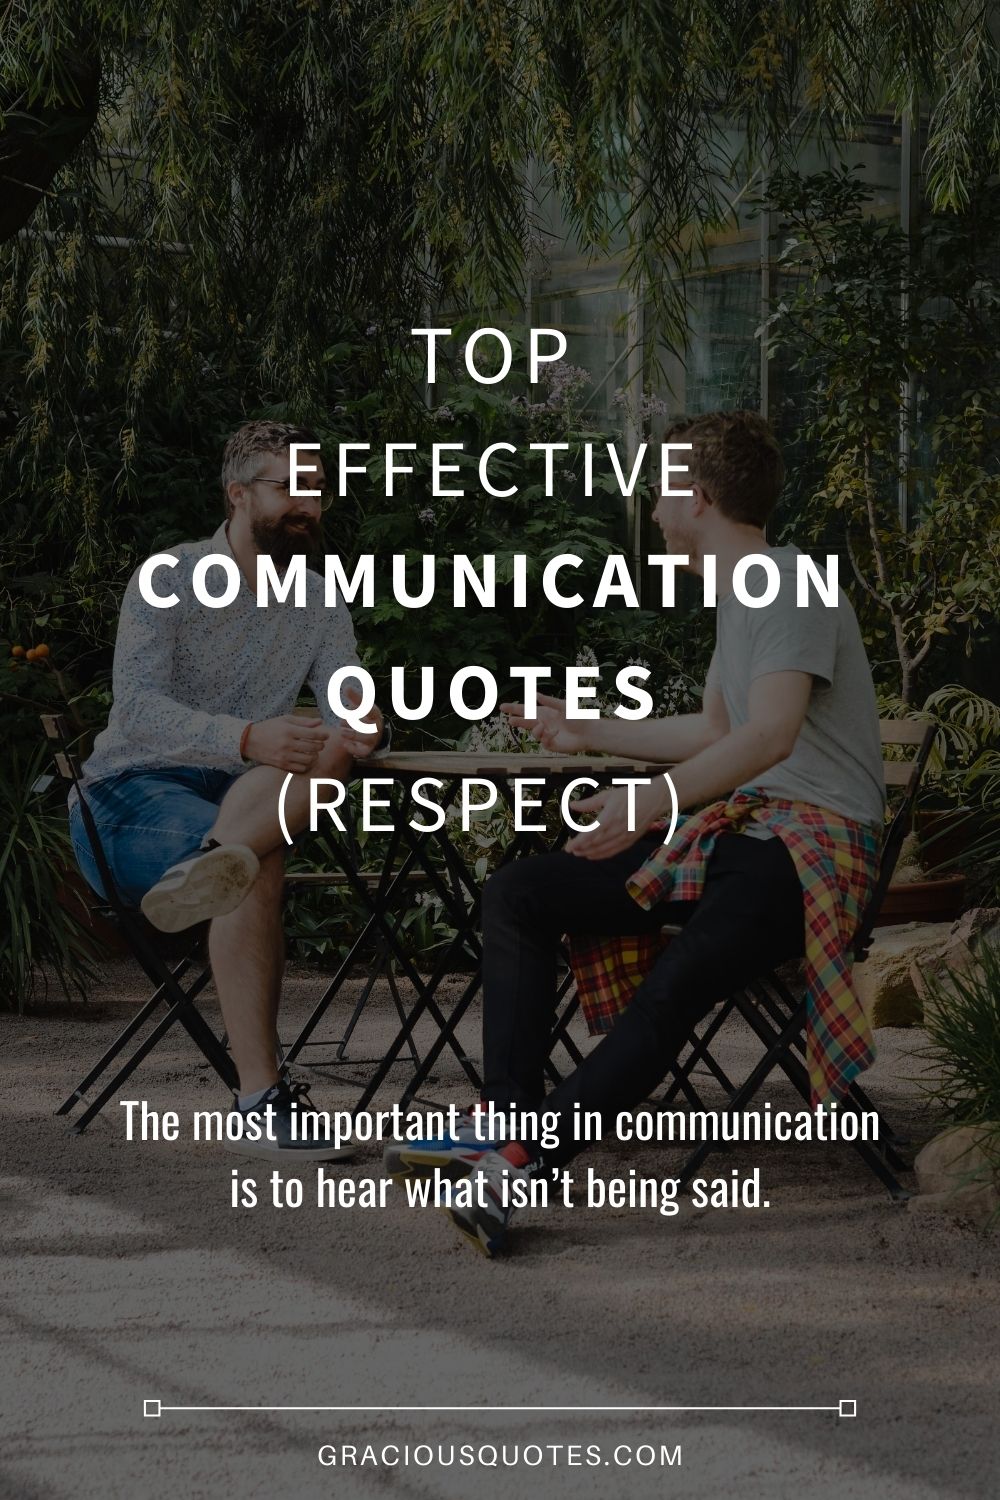 37 Effective Communication Quotes (RESPECT)